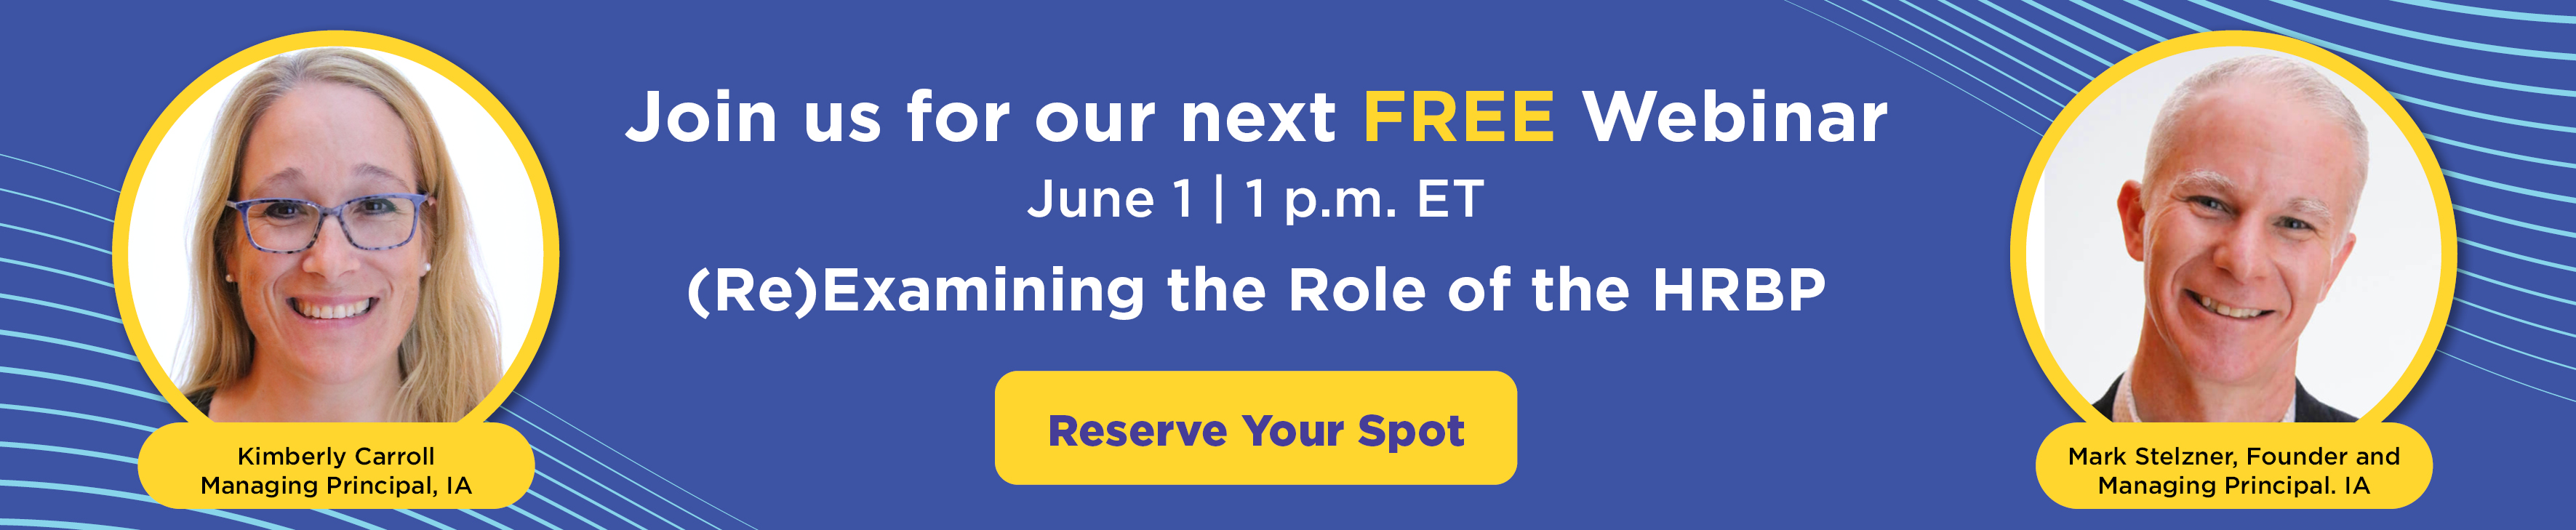 Join us for our next FREE Webinar